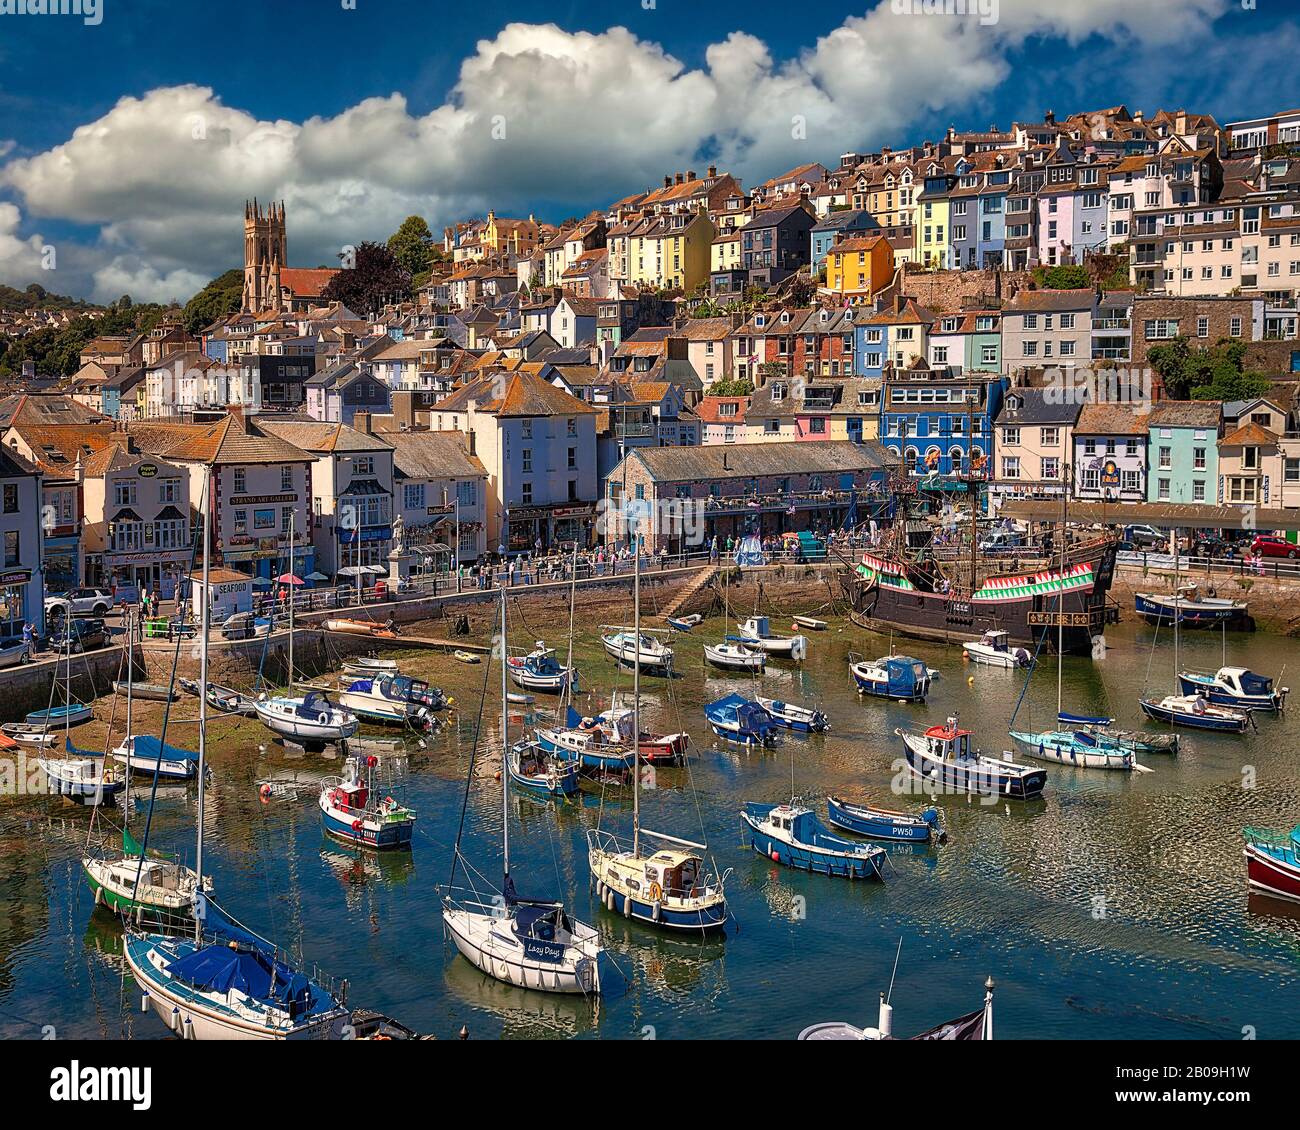 GB - DEVON: Brixham village and busy harbour area (HDR-Image) Stock Photo